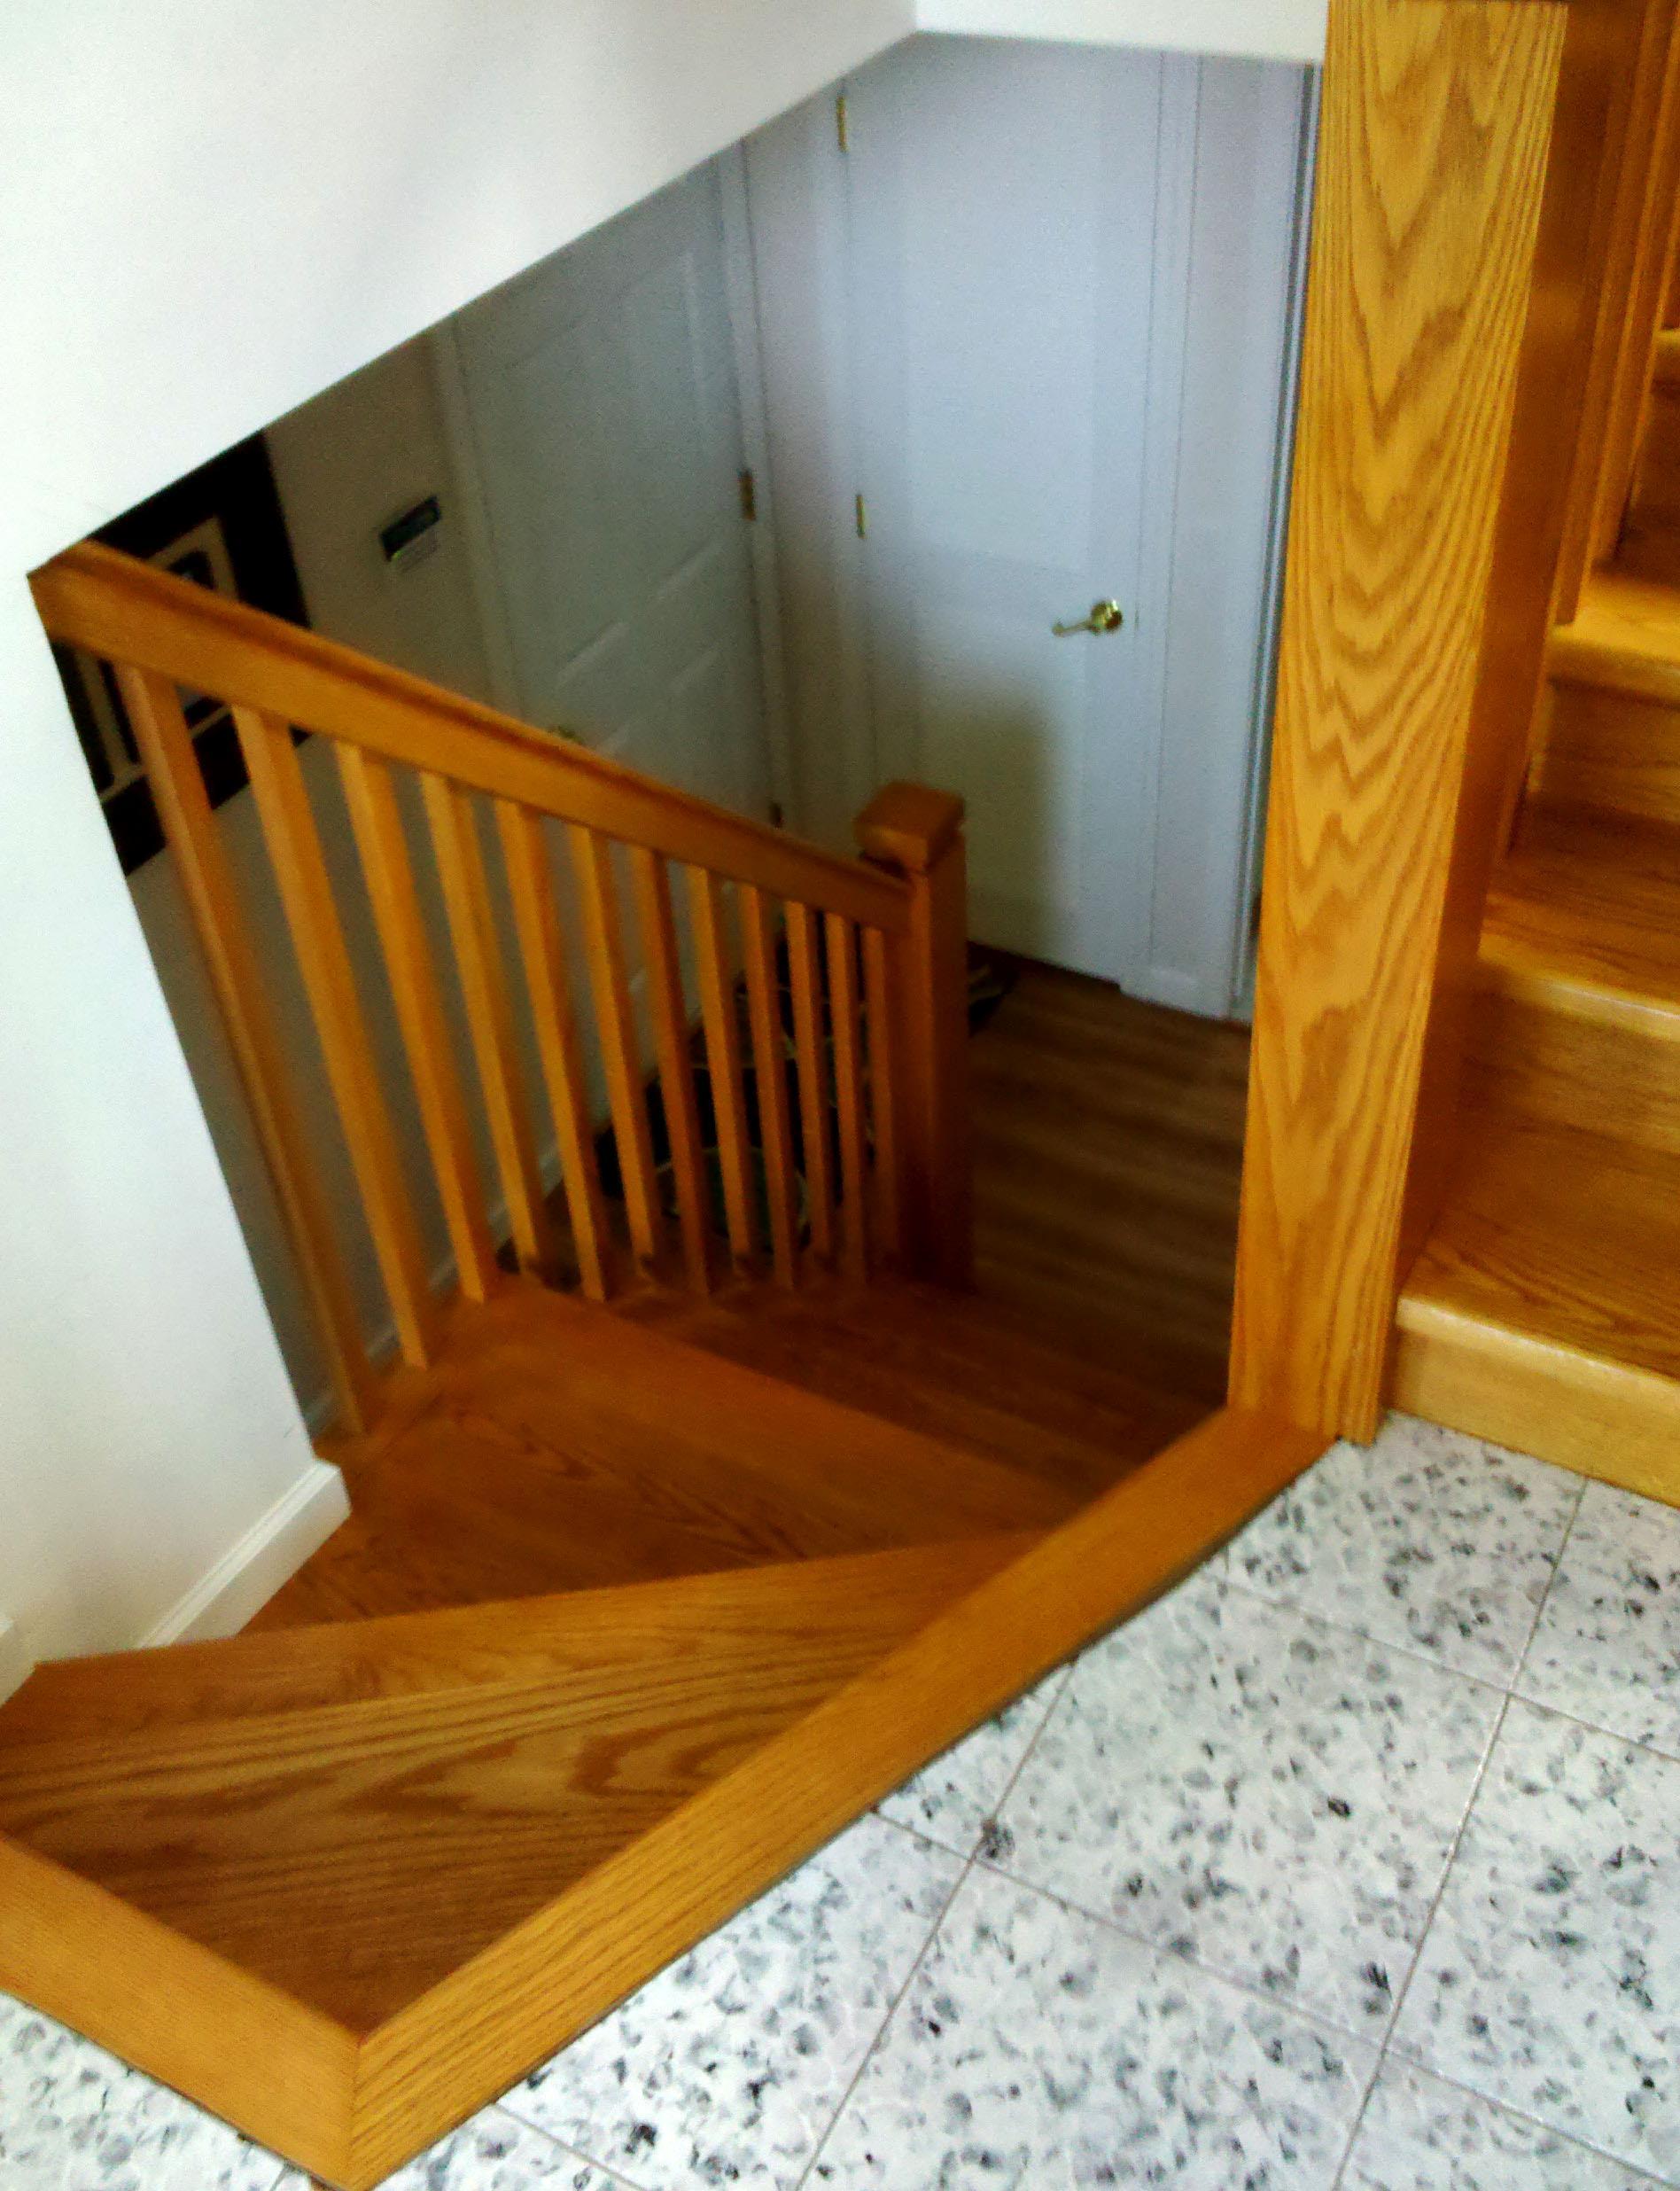 New stairway to refinished basement including new flooring & doors.